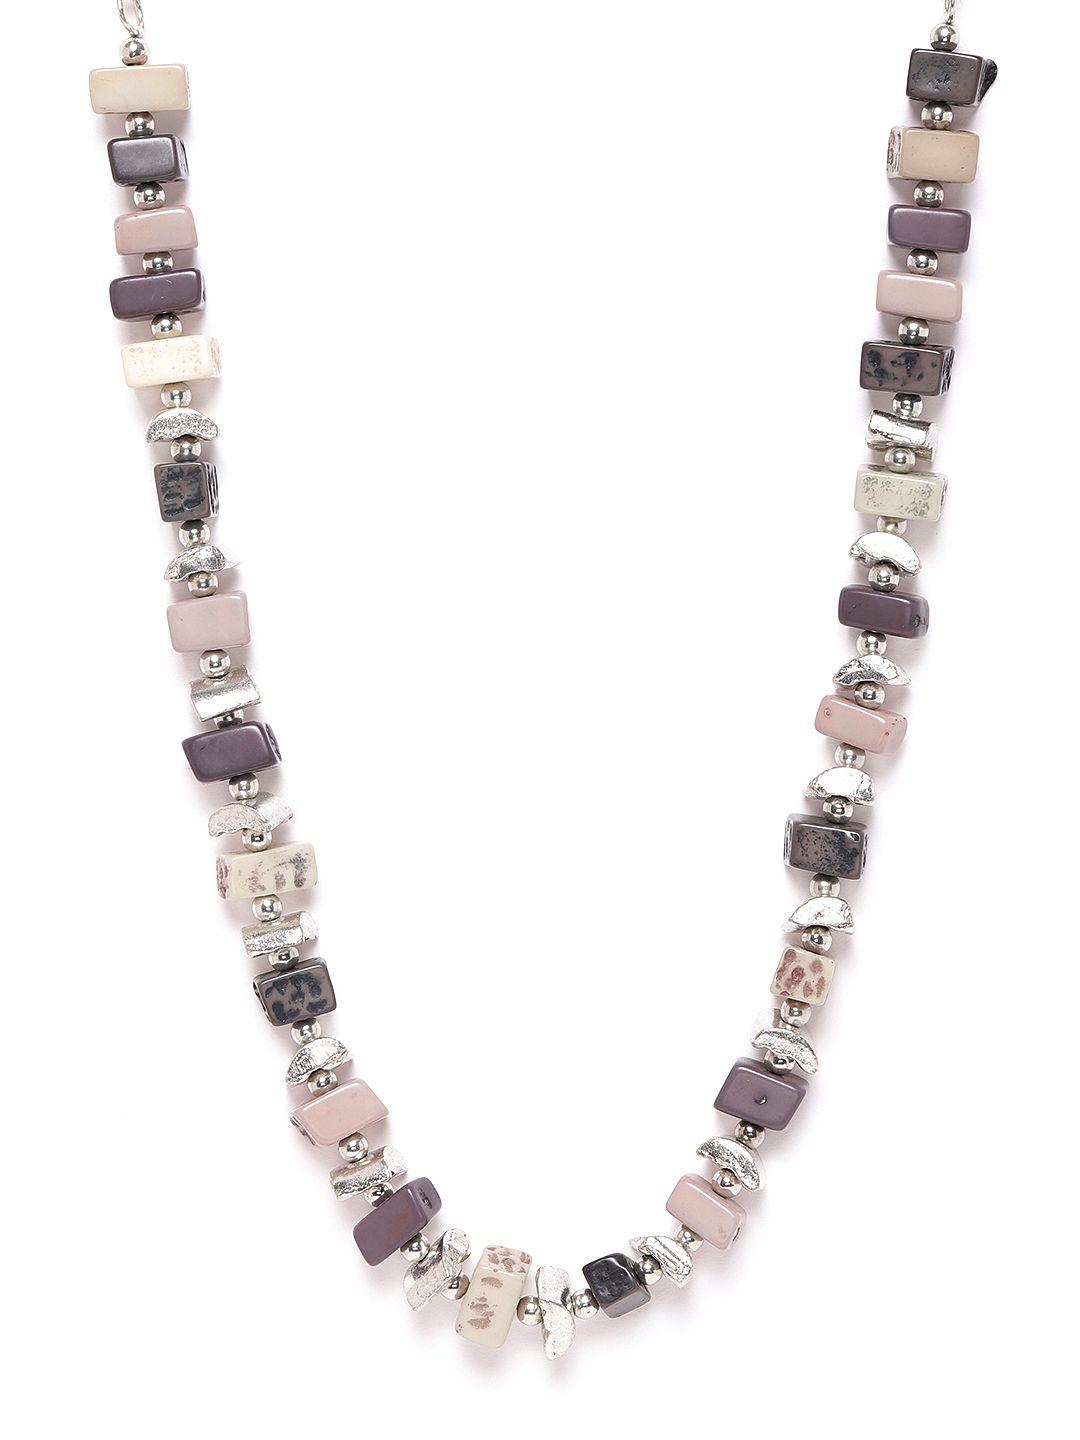 richeera-women-charcoal-grey-&-taupe-silver-plated-beaded-necklace